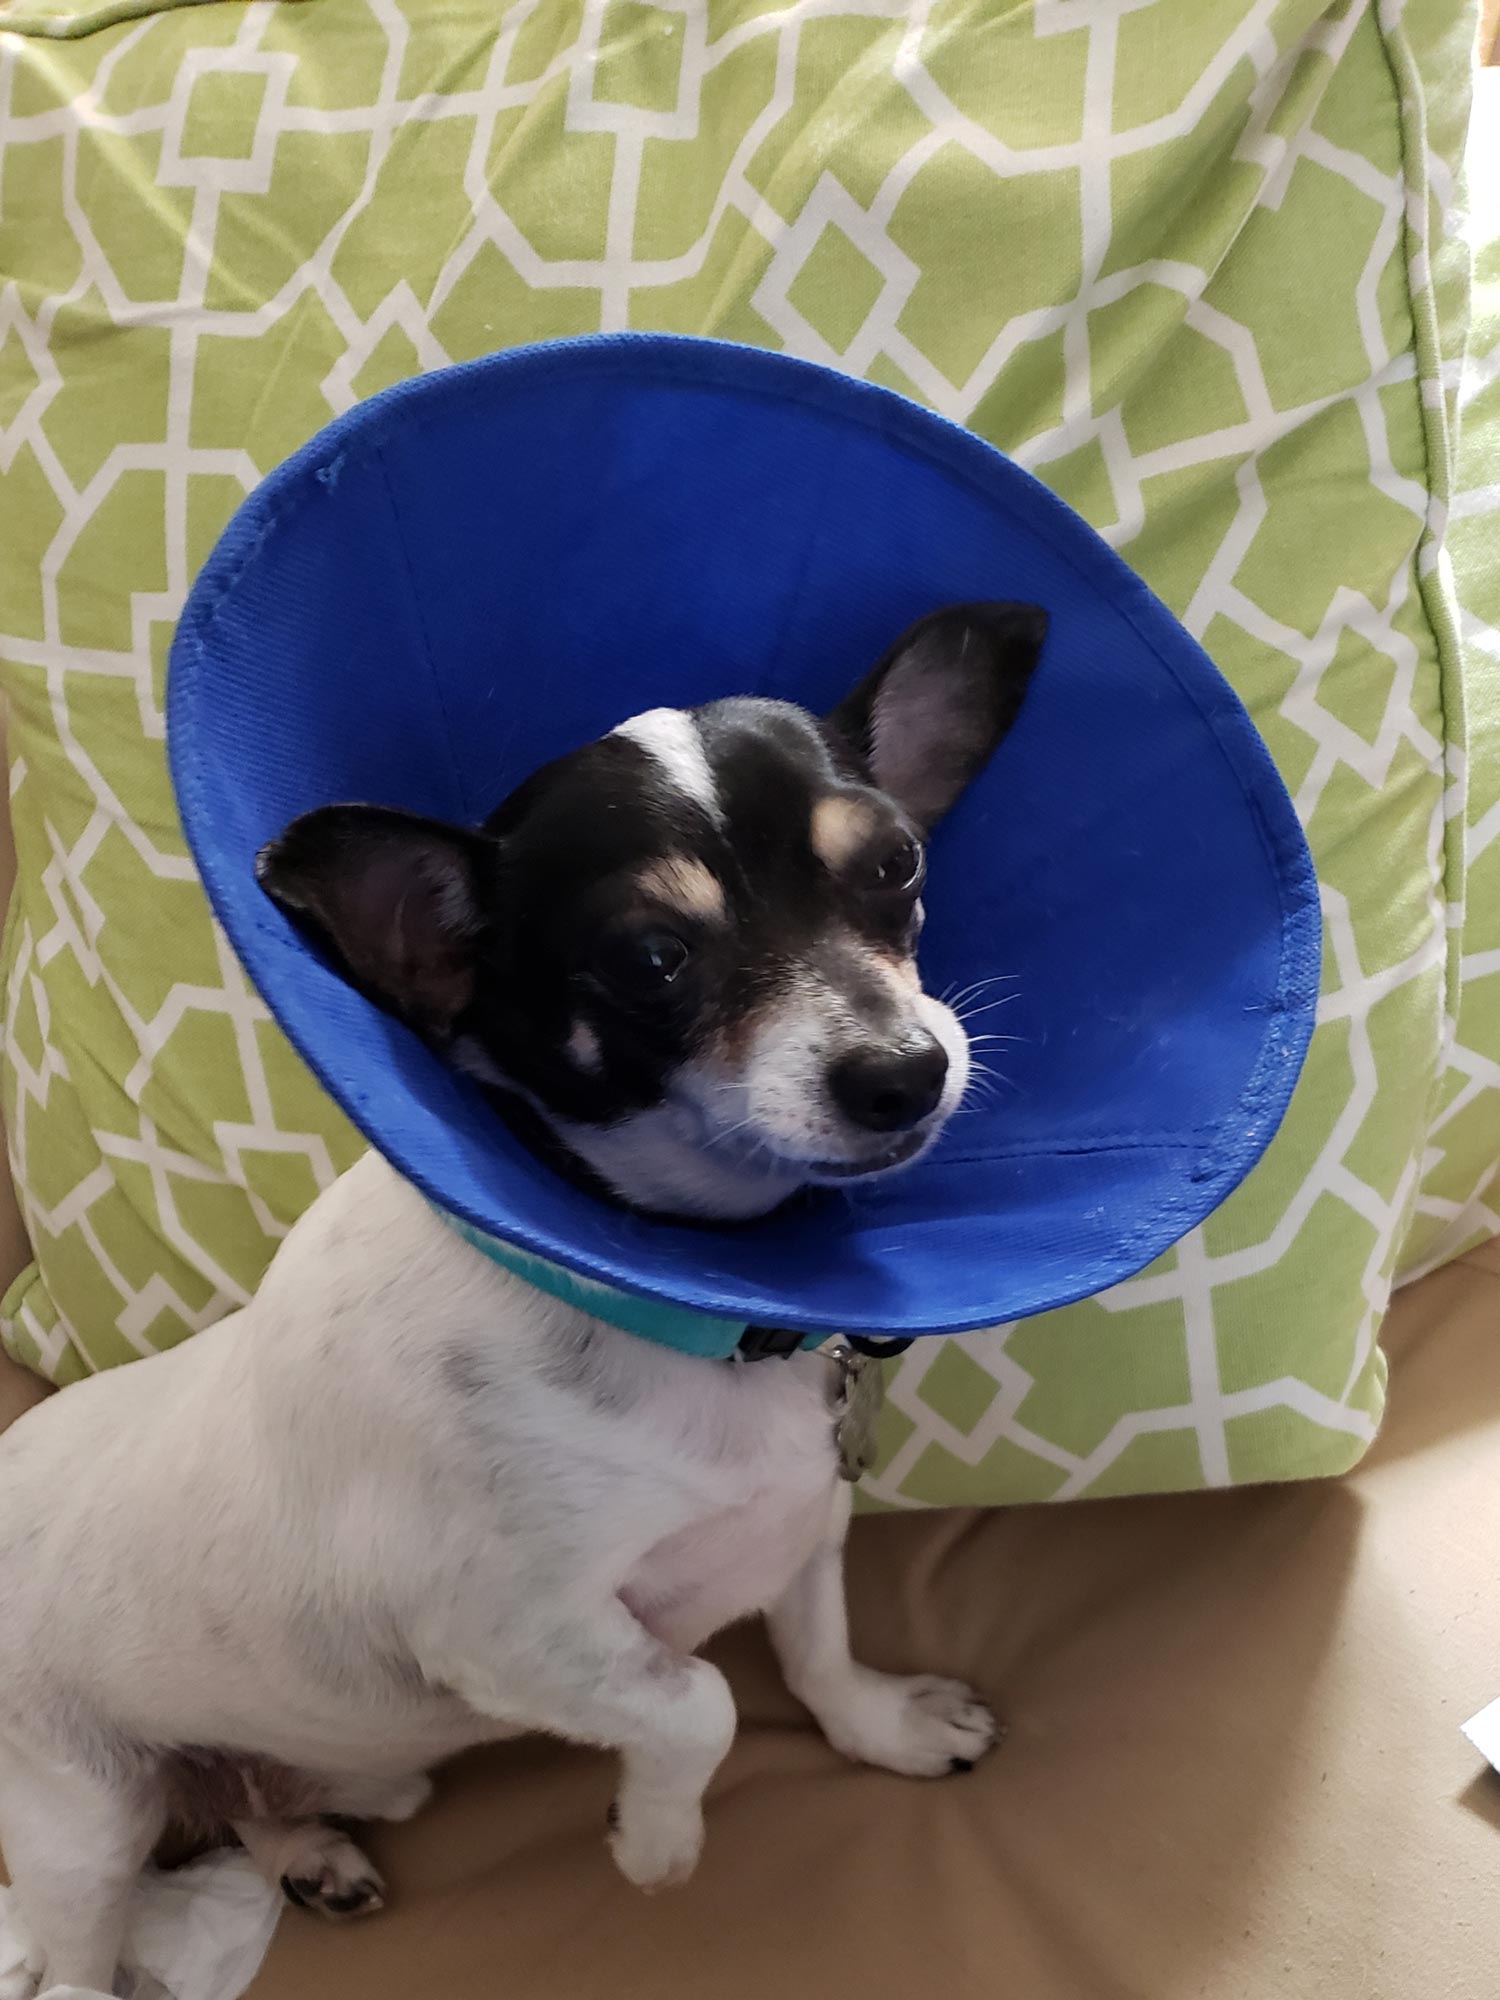 Duncan, a Pet Pal alum, is back after having his teeth professionally cleaned. He's wearing the "Cone of Shame" so he won't scratch his mouth. Pro cleanings are important to keep the mouth and teeth healthy.